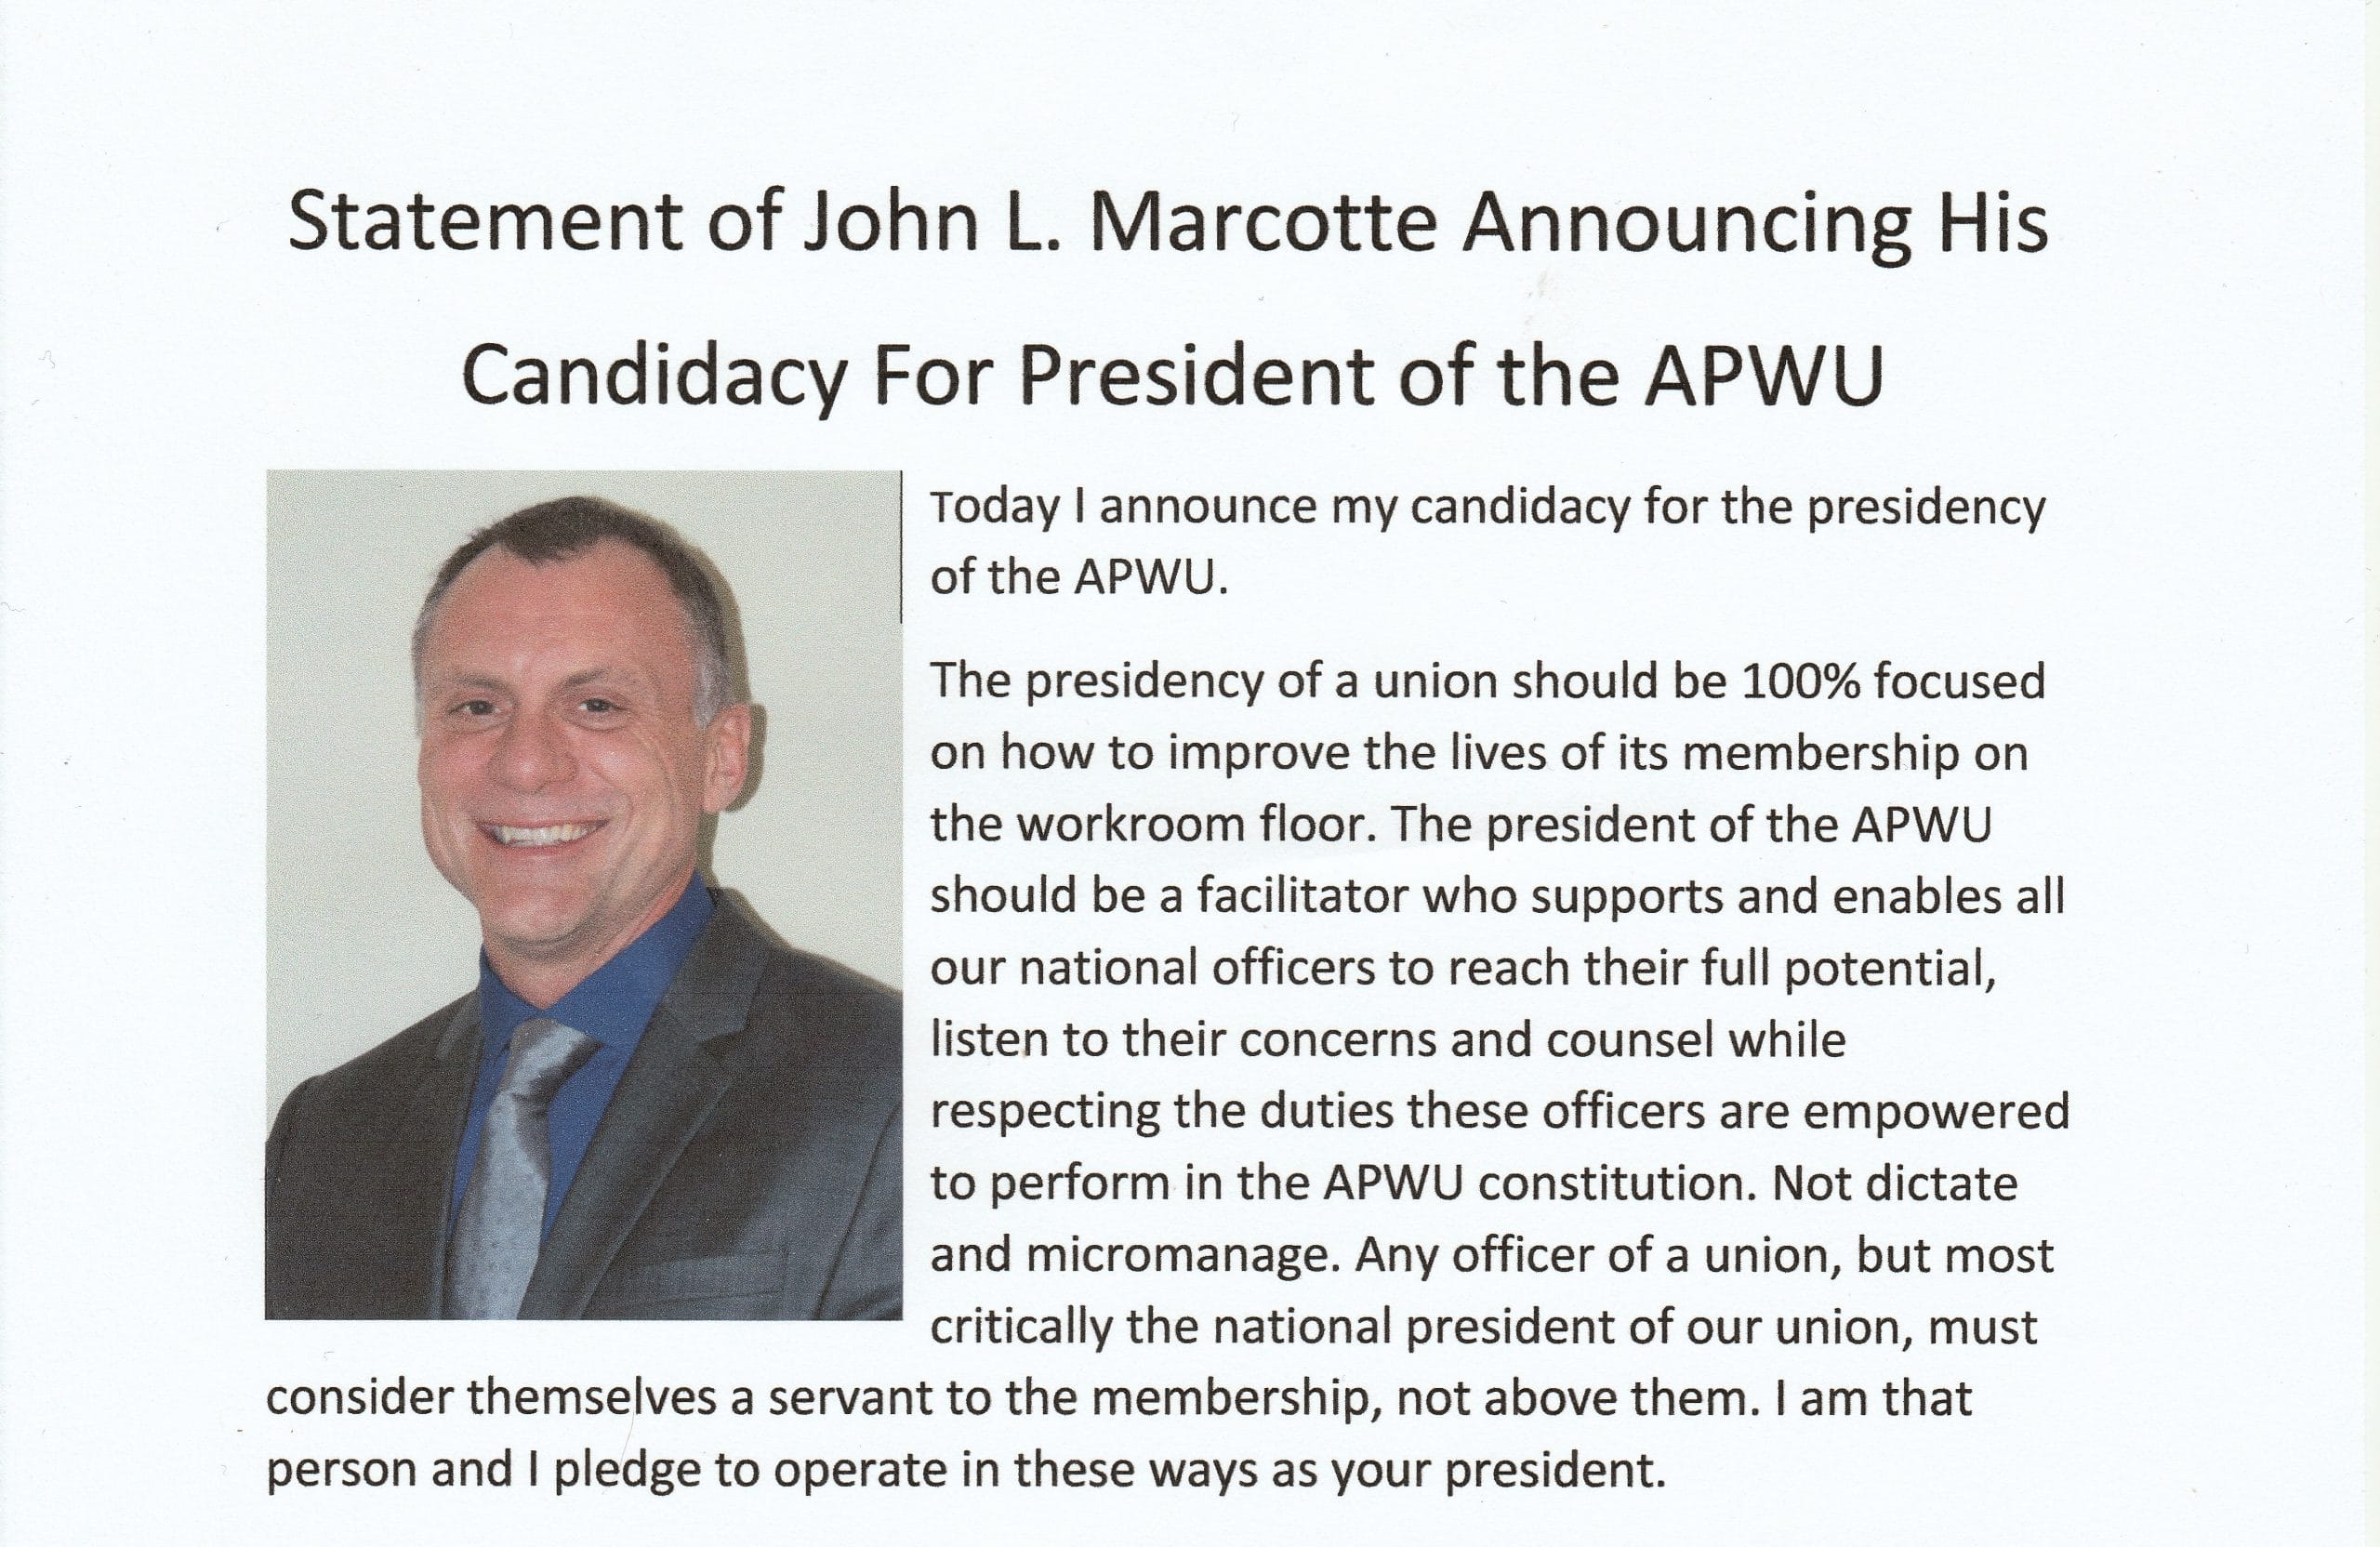 John L. Marcotte Announces His Candidacy For President of the APWU